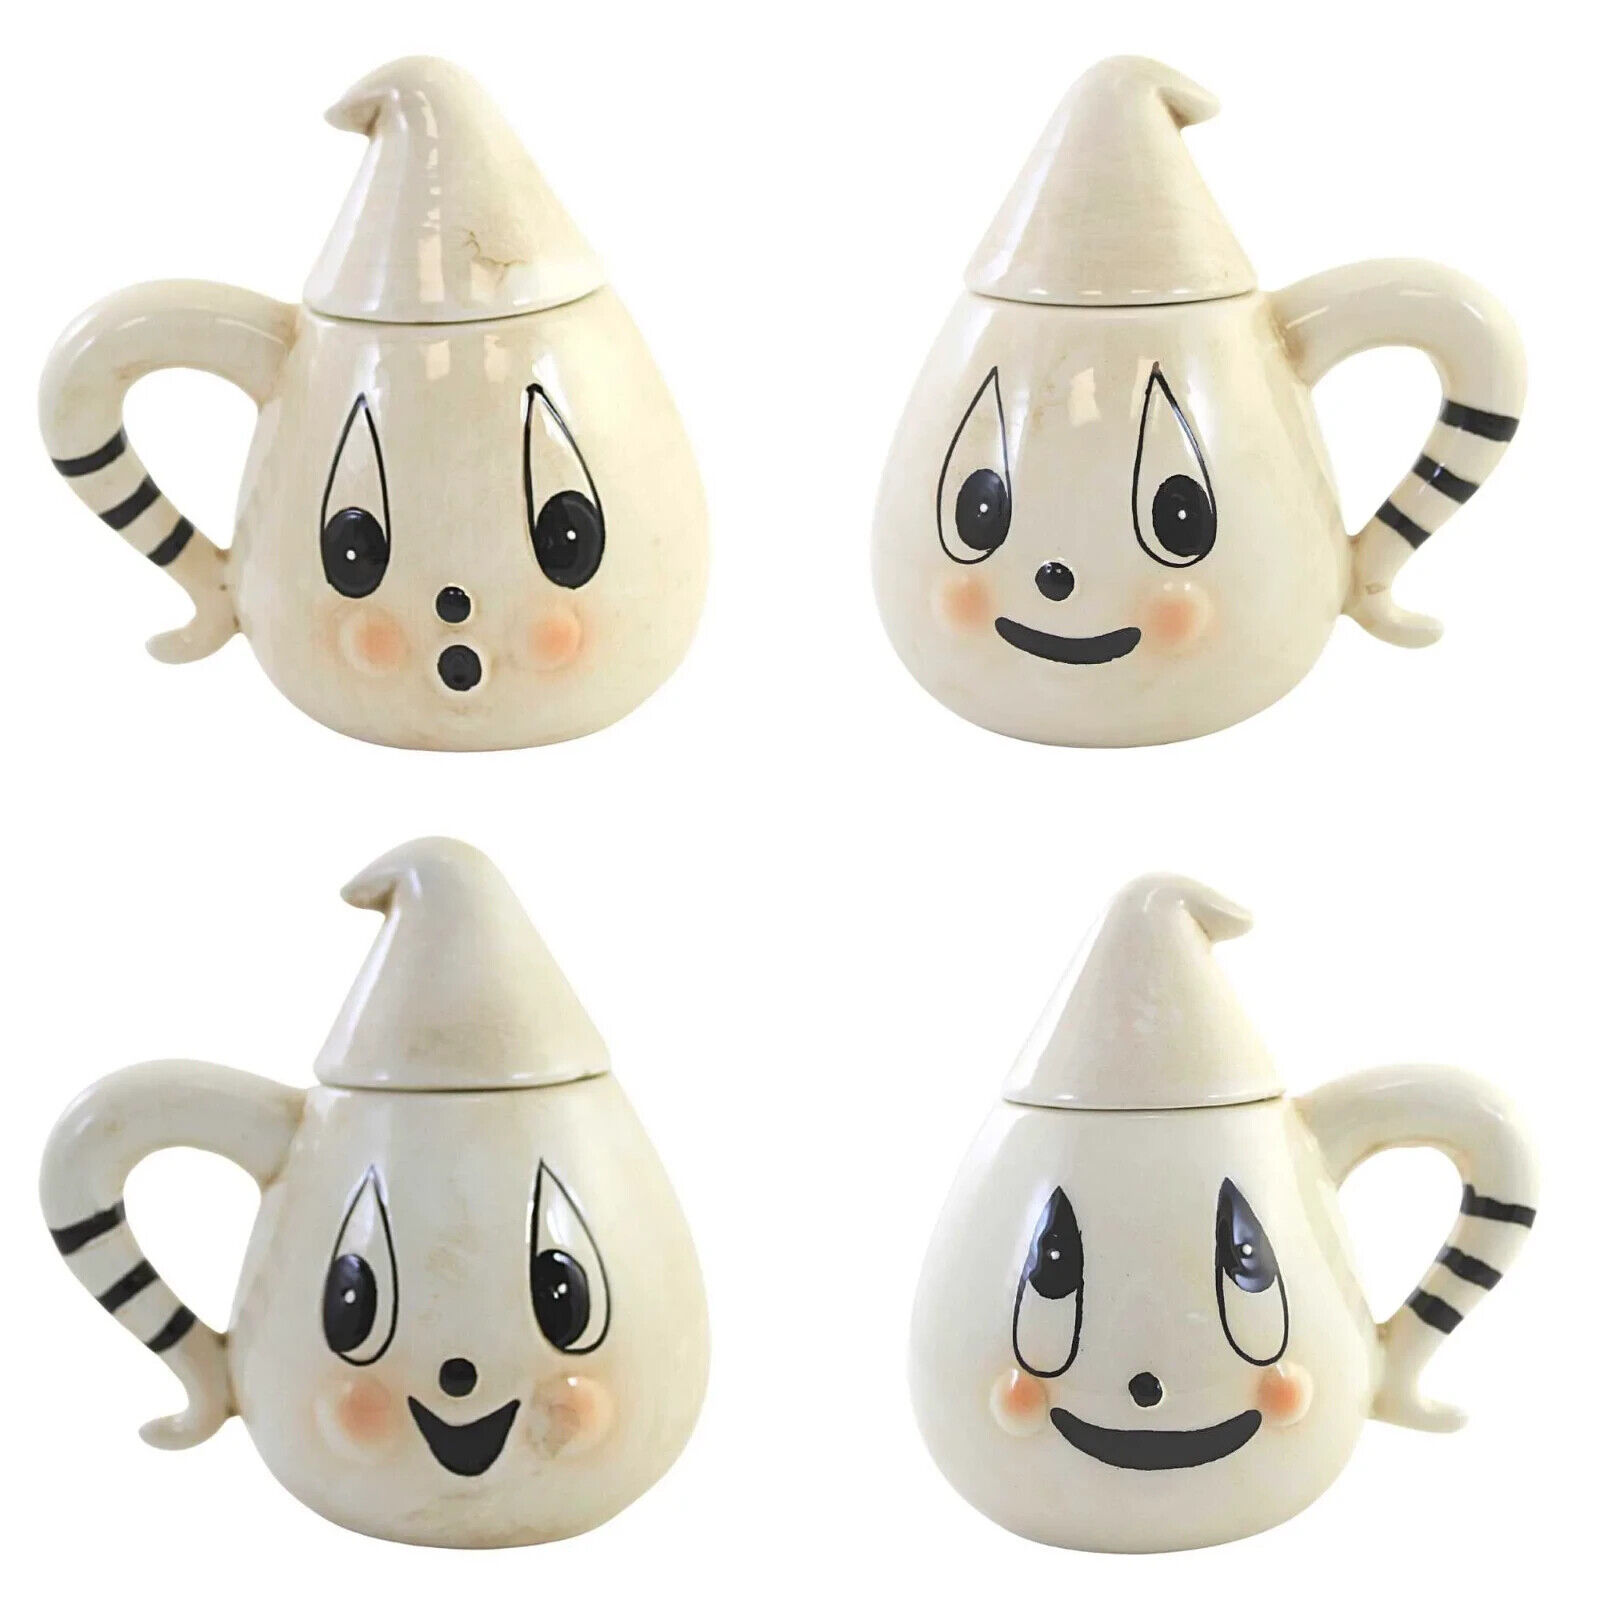 New Johanna Parker Ghost Teacups with Lids Set of 4